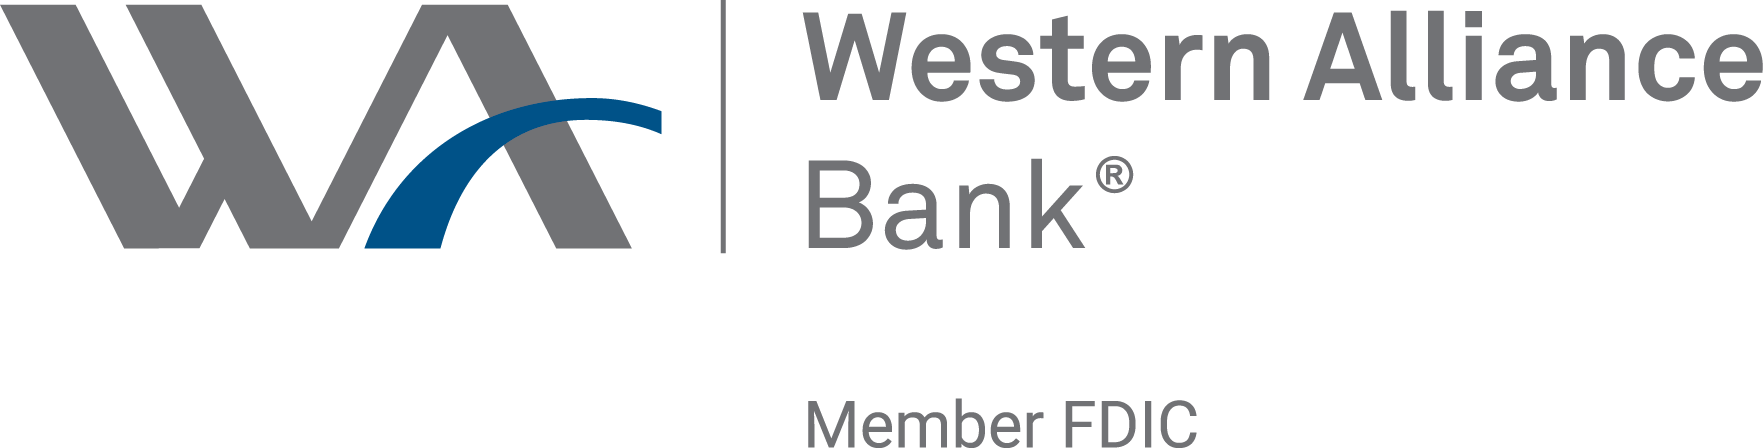 my banking direct comparison: Western Alliance Bank